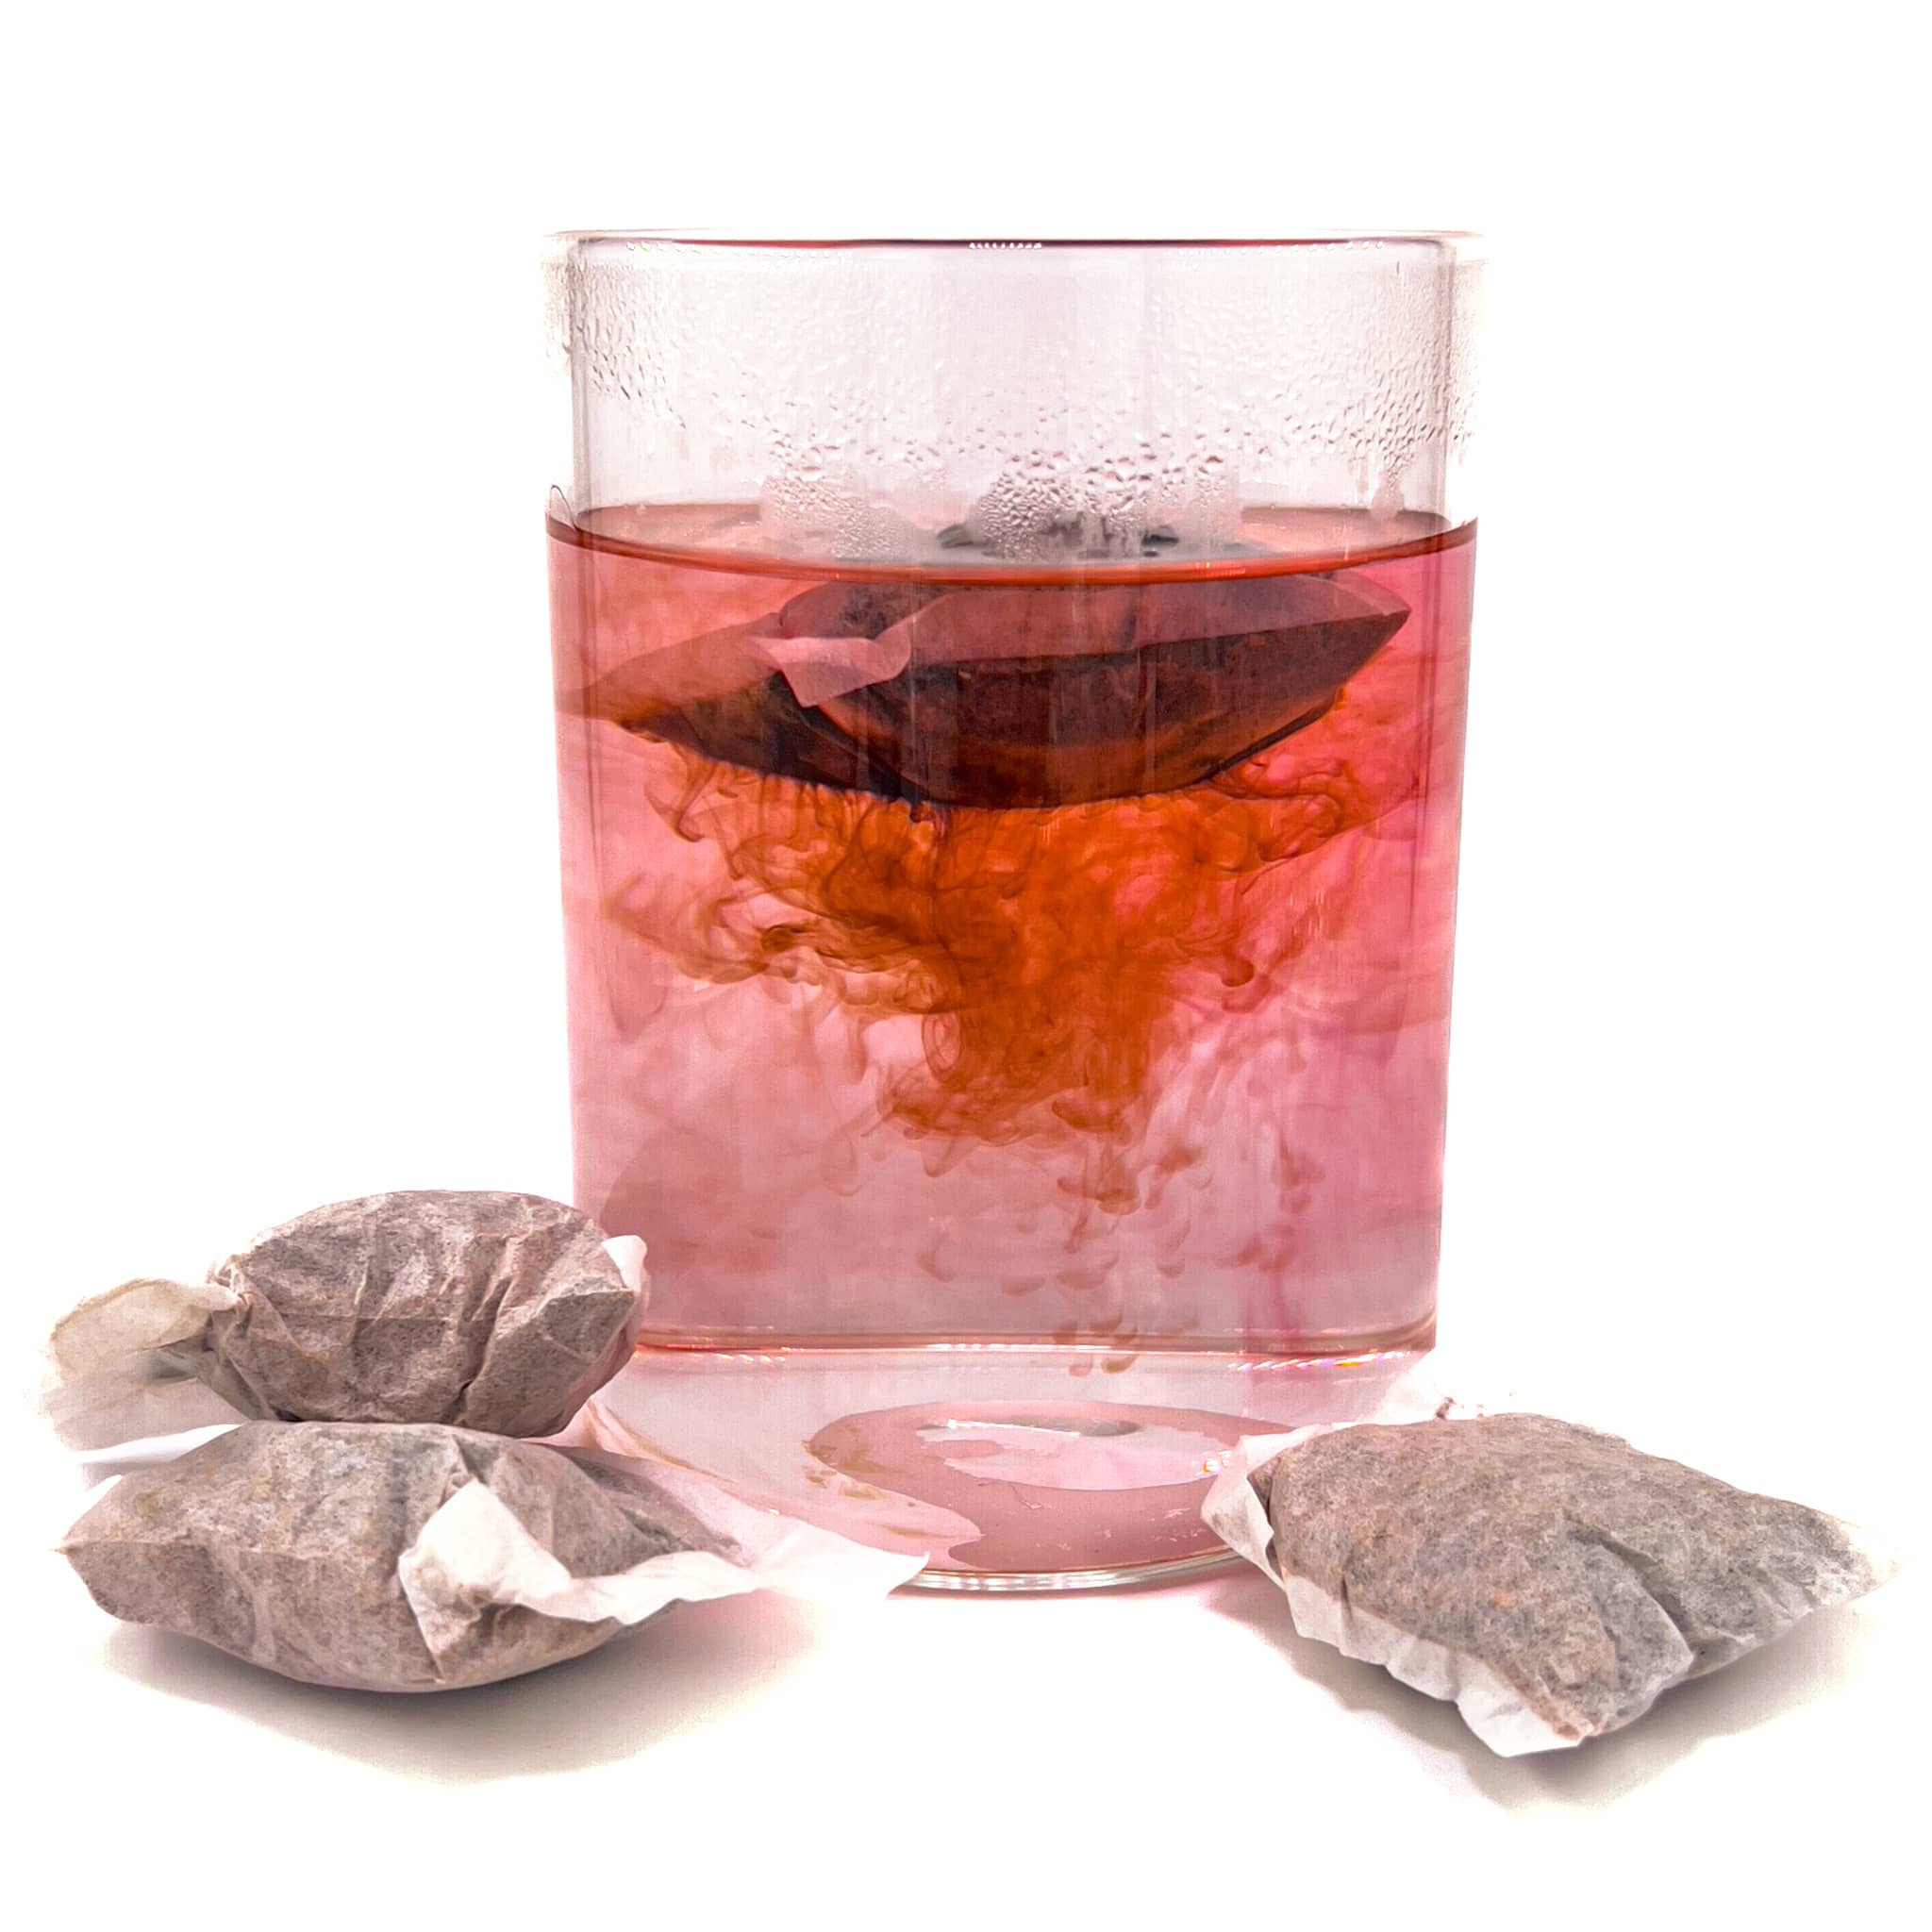 How to Make Tea Without Tea Bags: 8 Smart Ideas to Try – Seven Teas